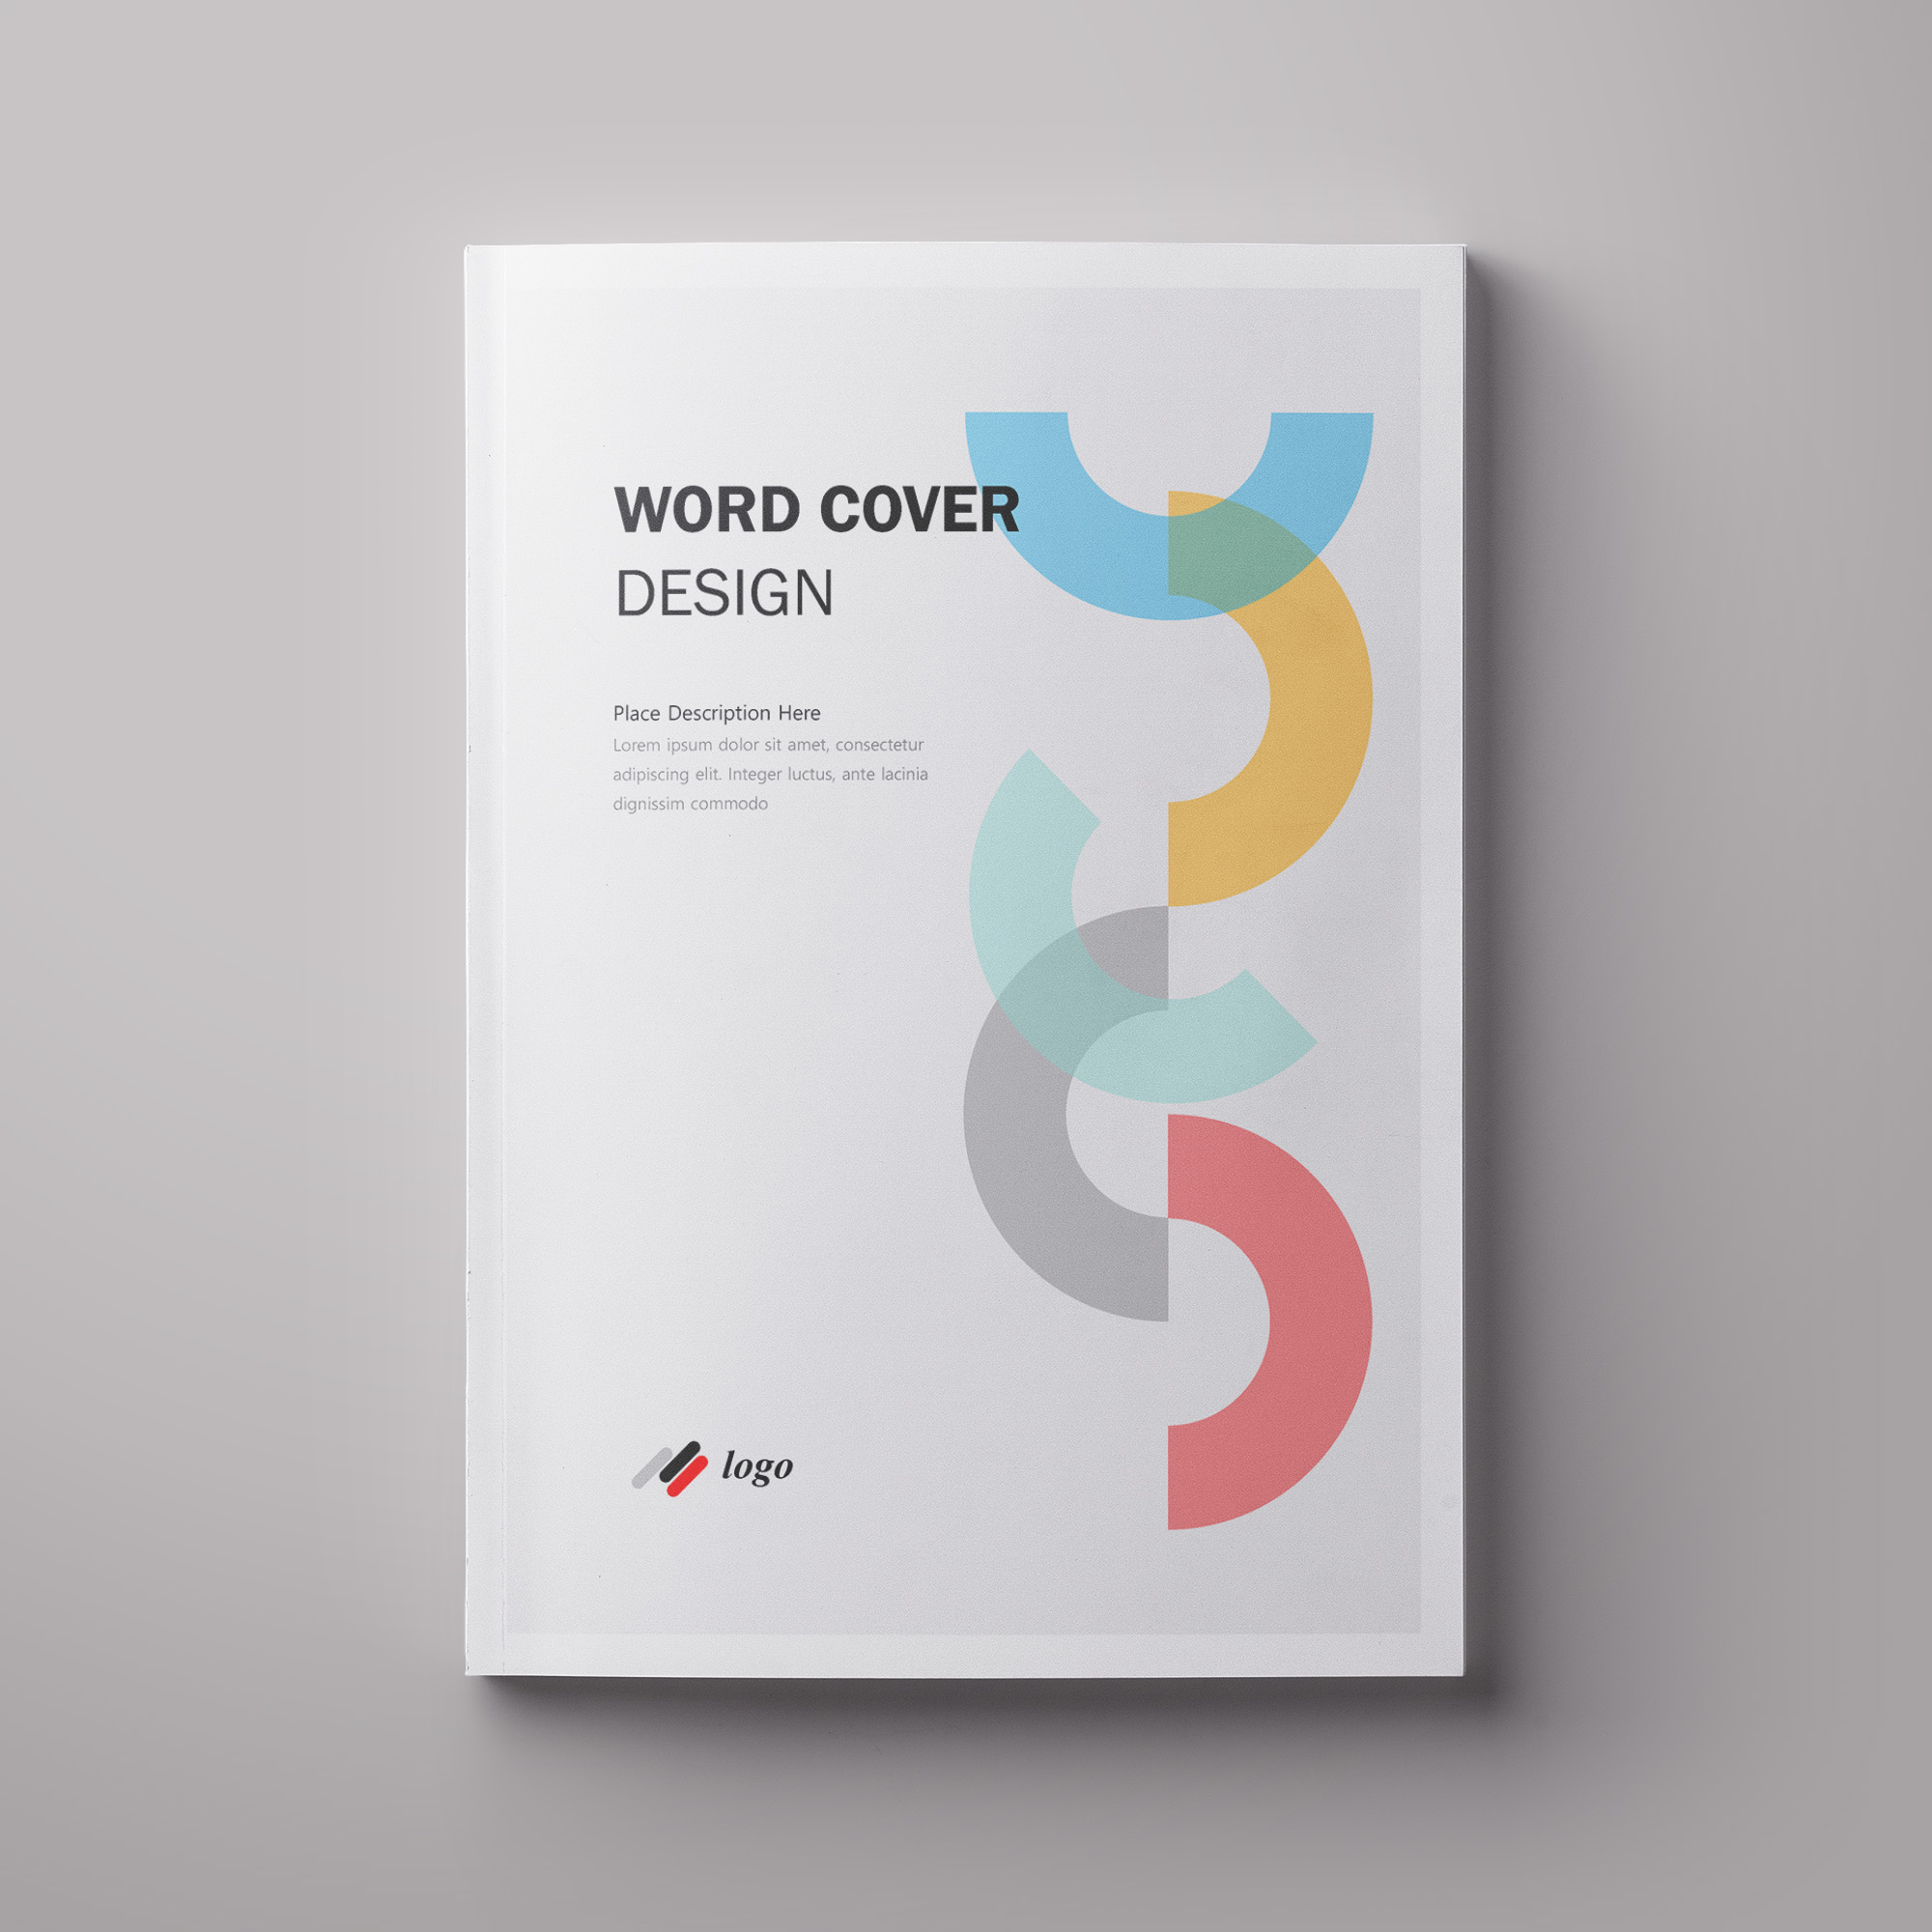 Microsoft Word Cover Templates | 10 Free Download - Word Free